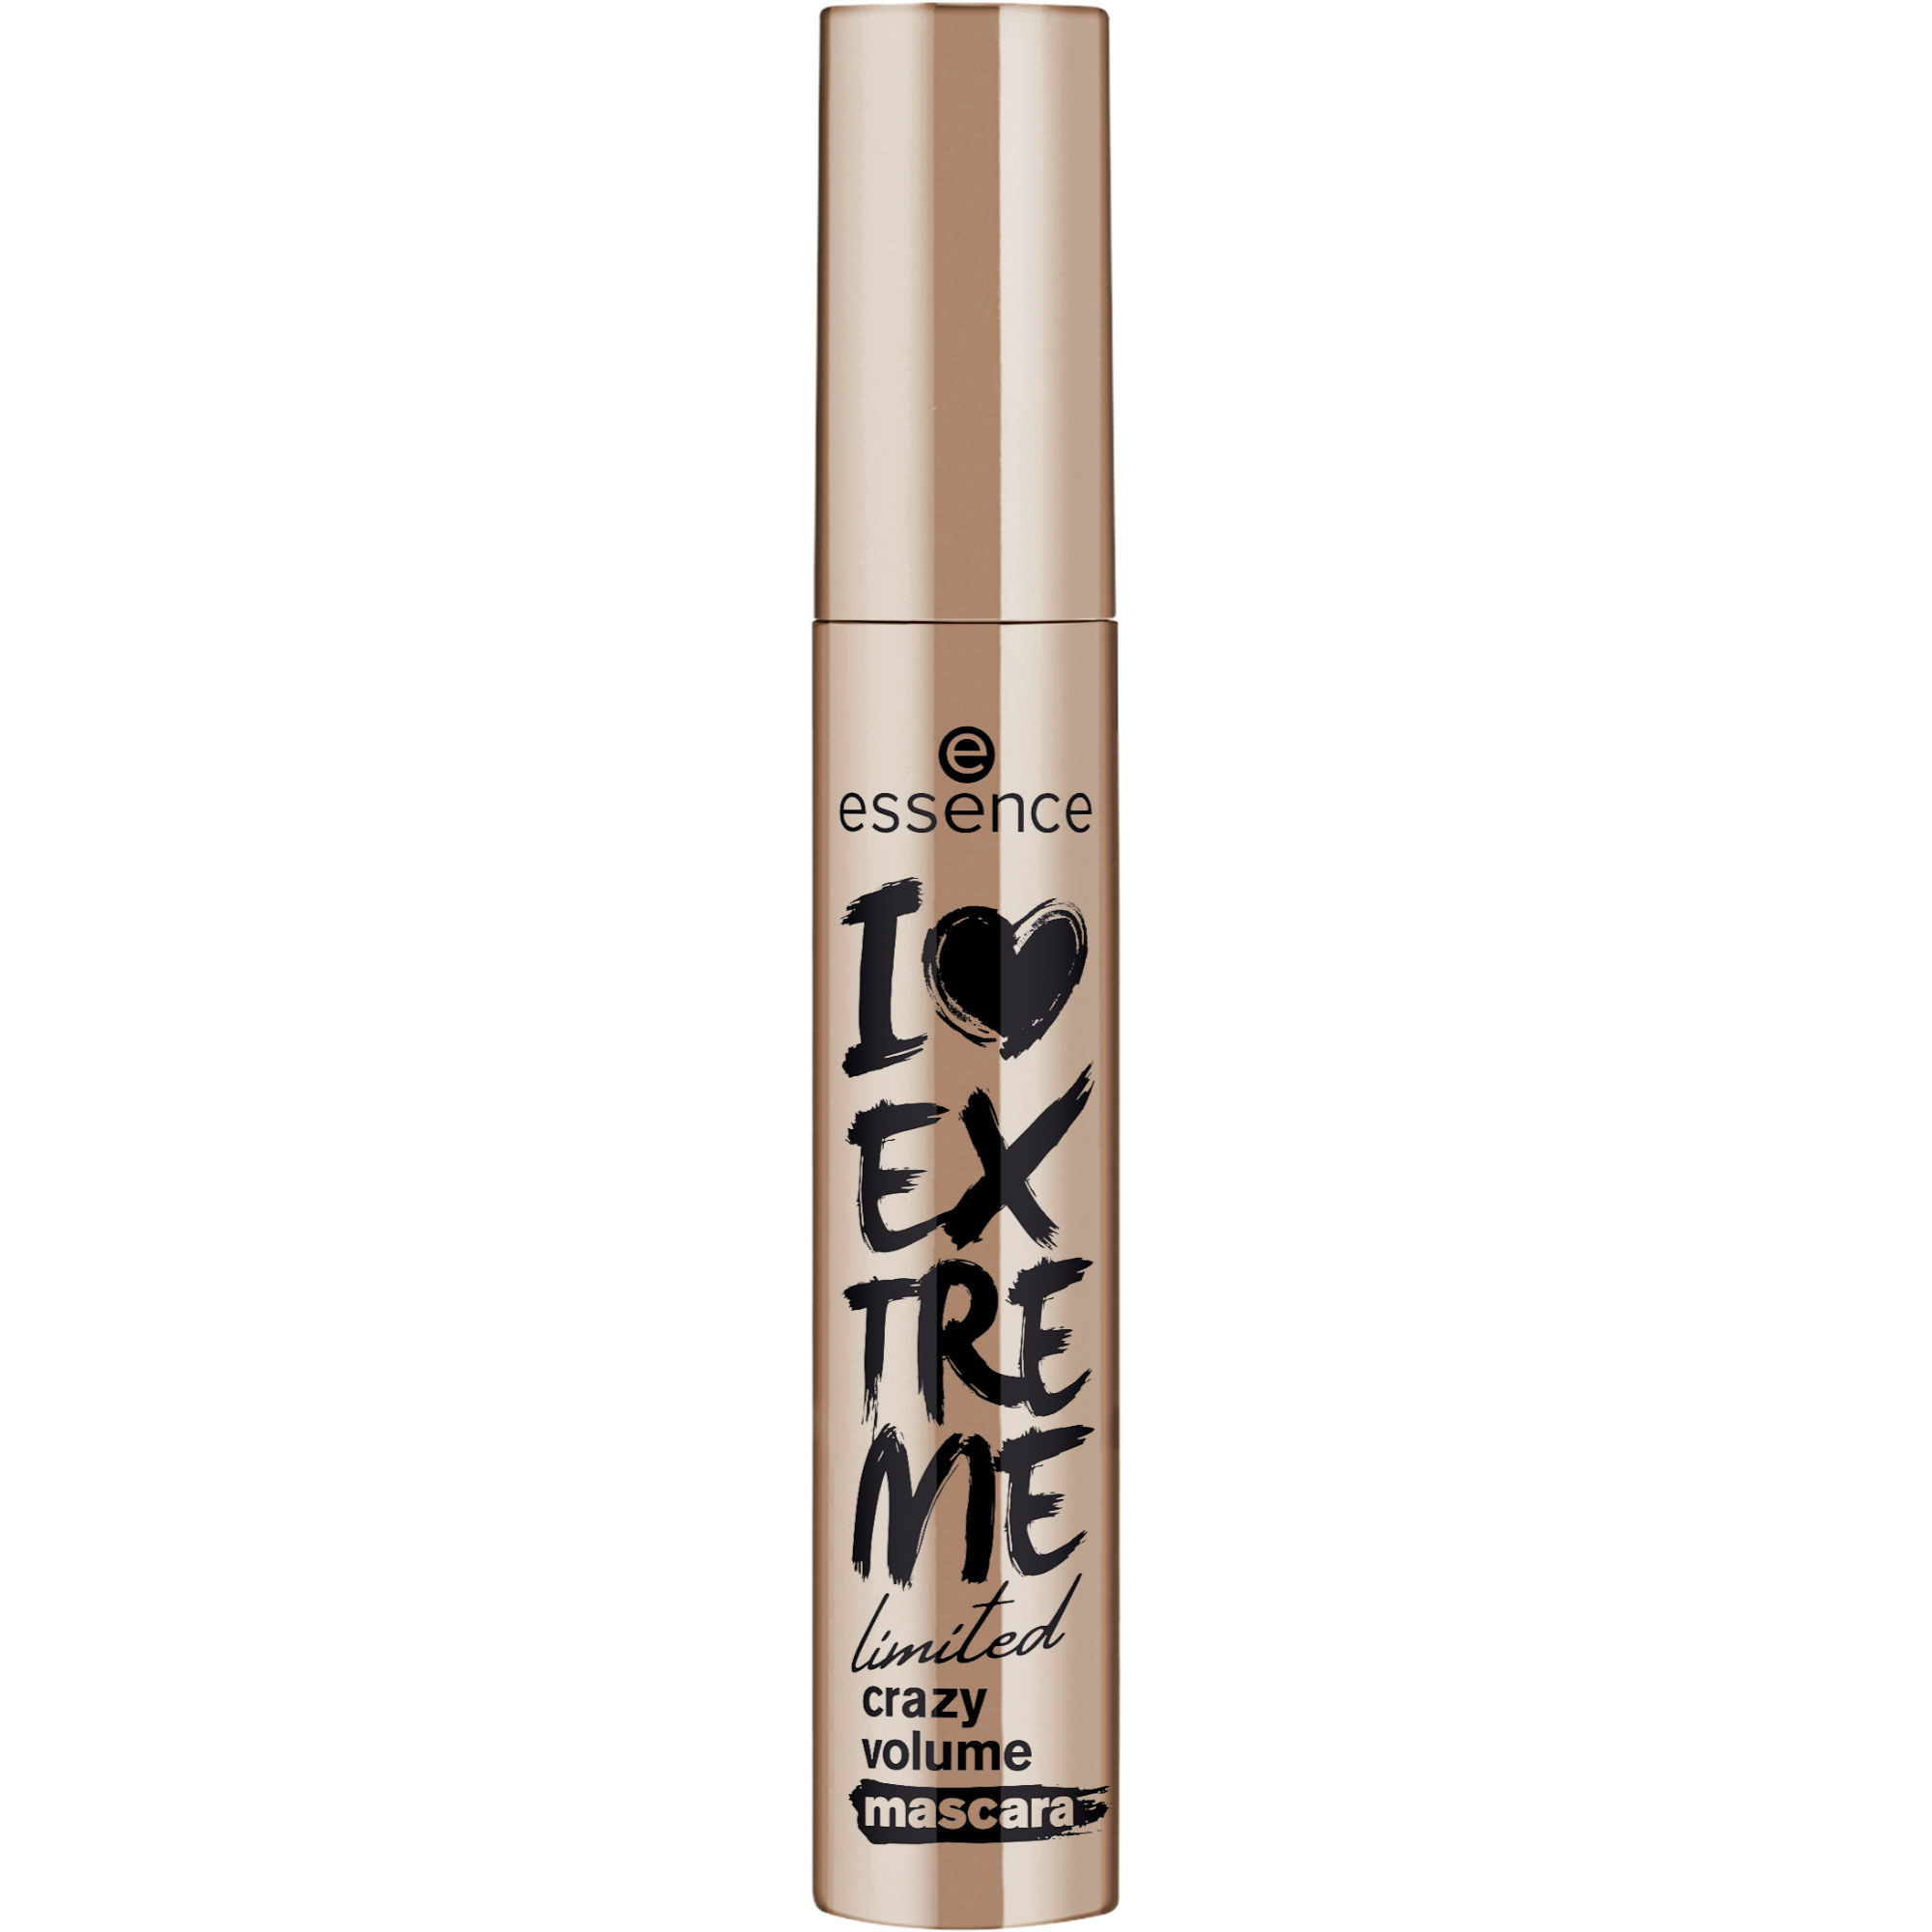 the glowin' golds I LOVE EXTREME limited crazy volume mascara